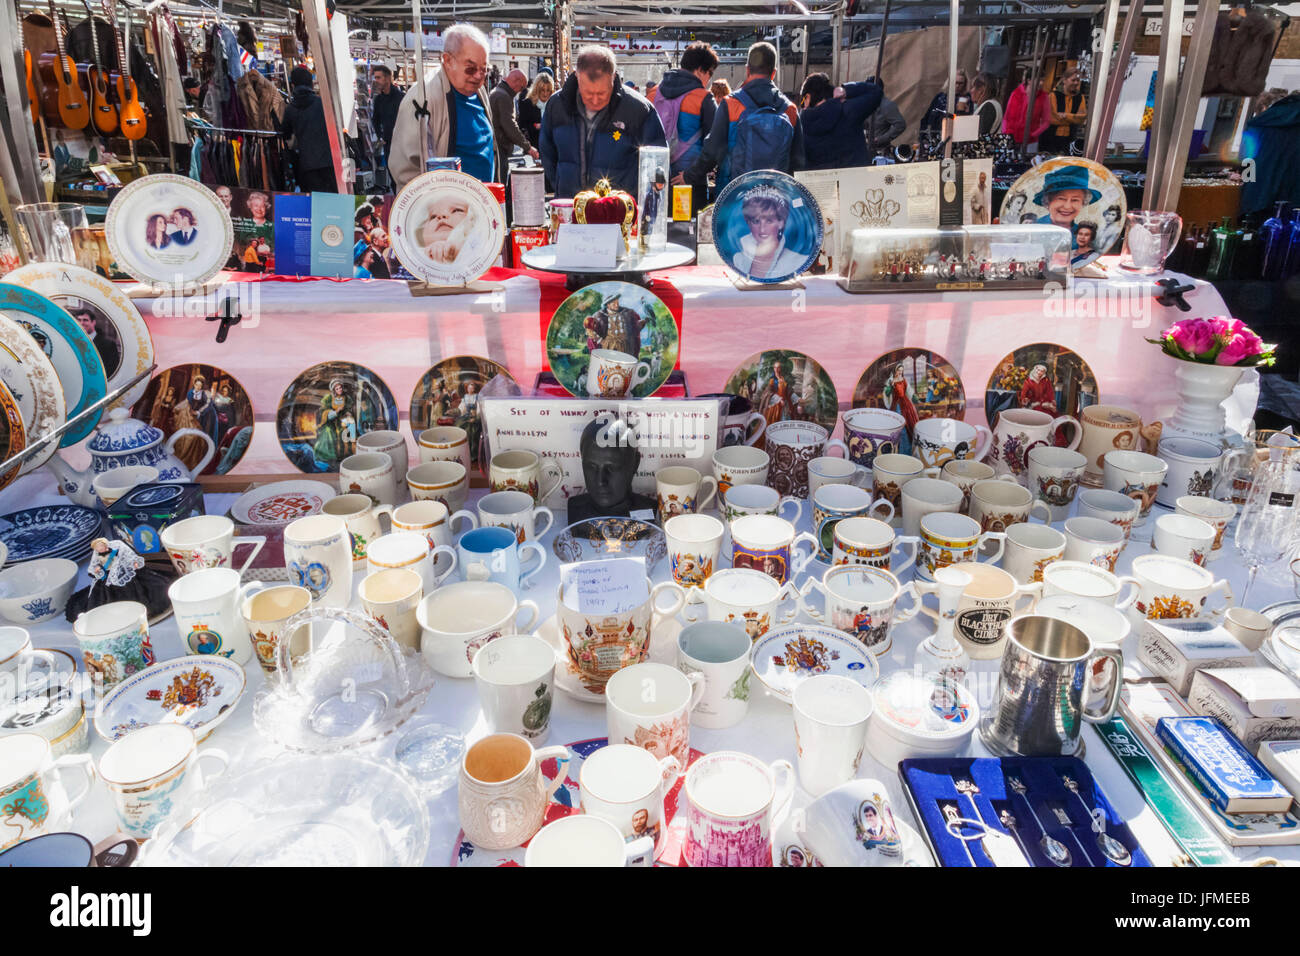 England, London, Greenwich, Greenwich Market, Antique Stall Display of Tableware Stock Photo